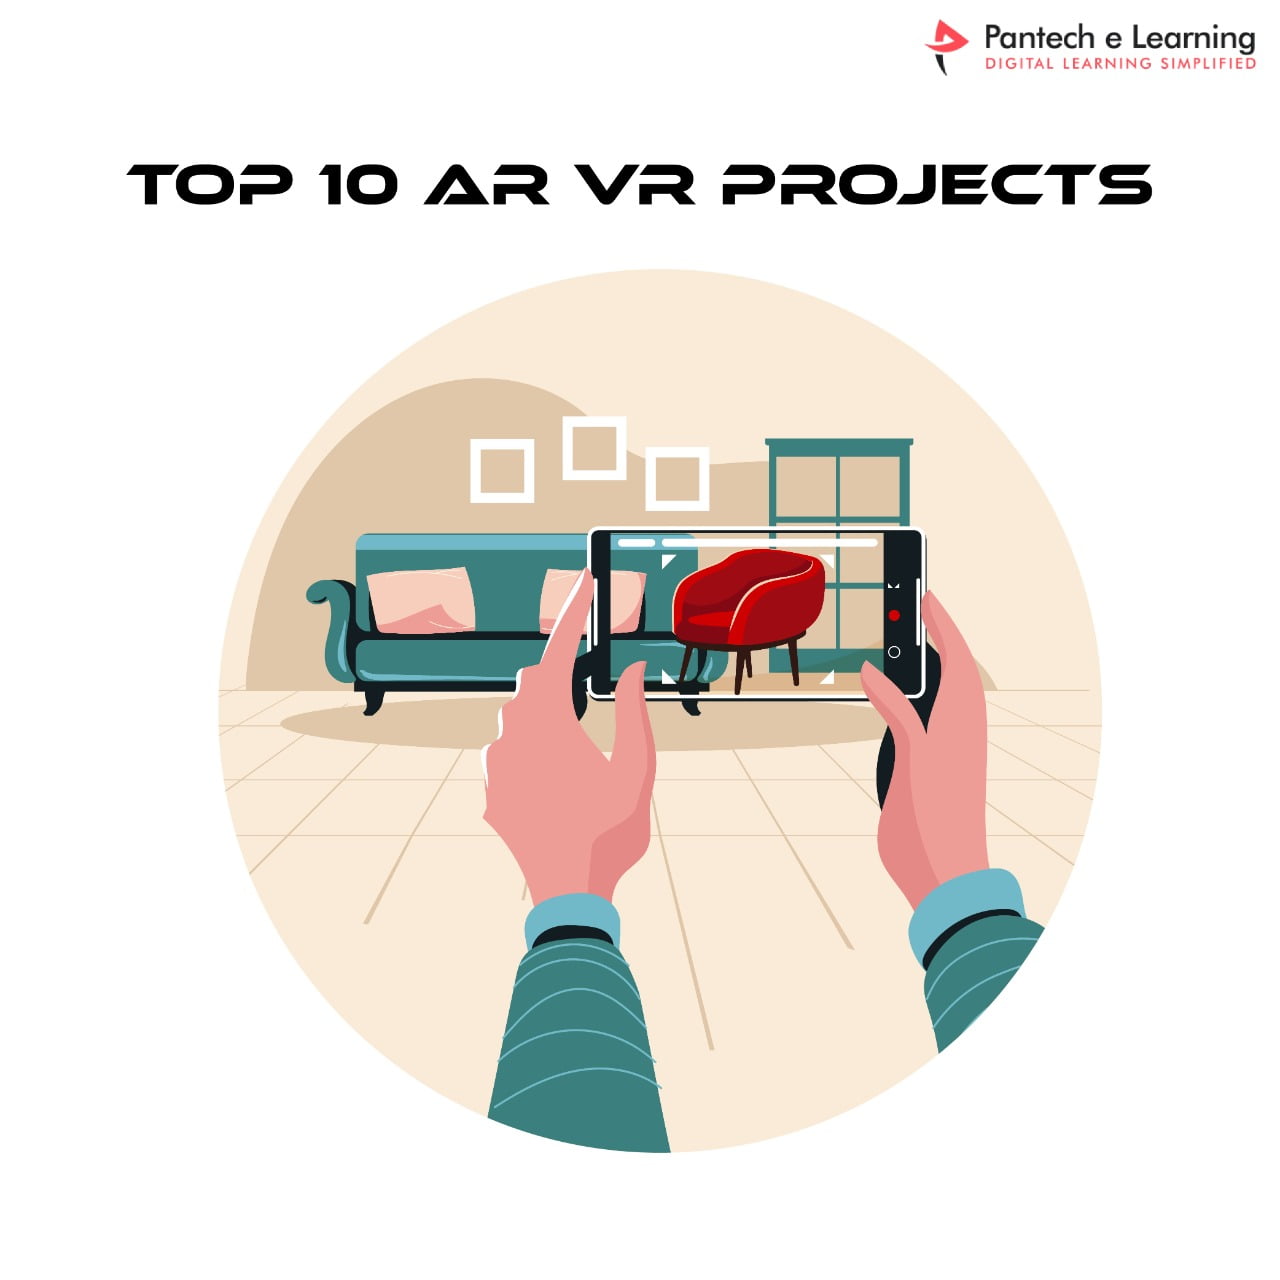 Top 10 AR VR Projects